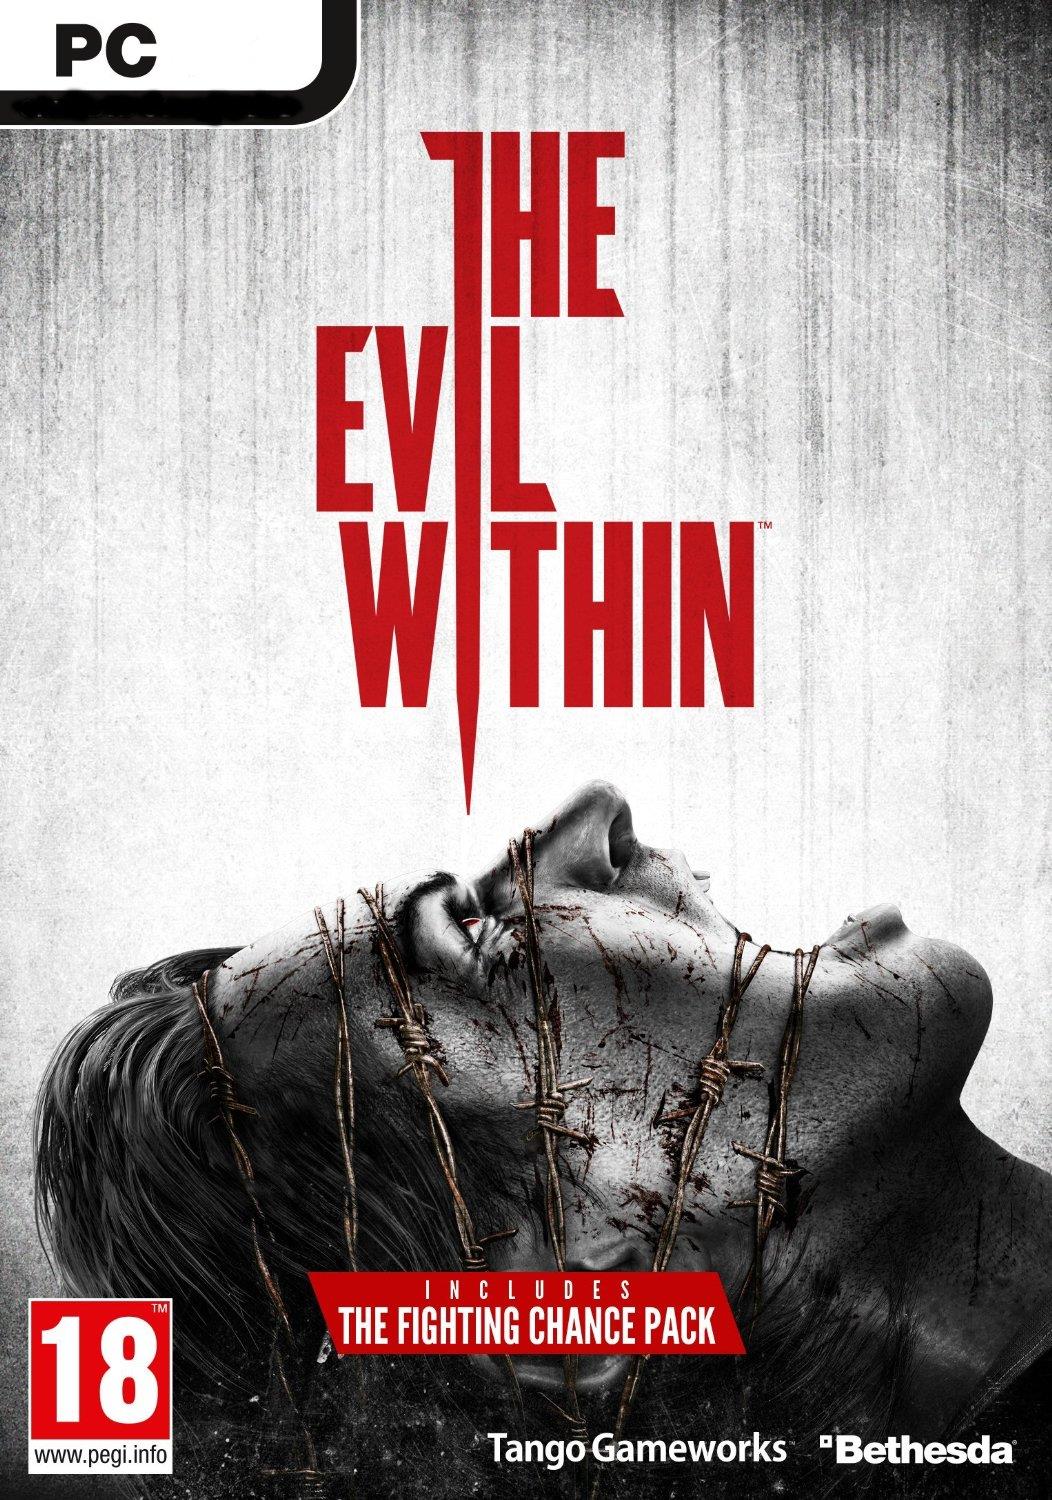 PC THE EVIL WITHIN THE FIGHTING CHANGE PACK